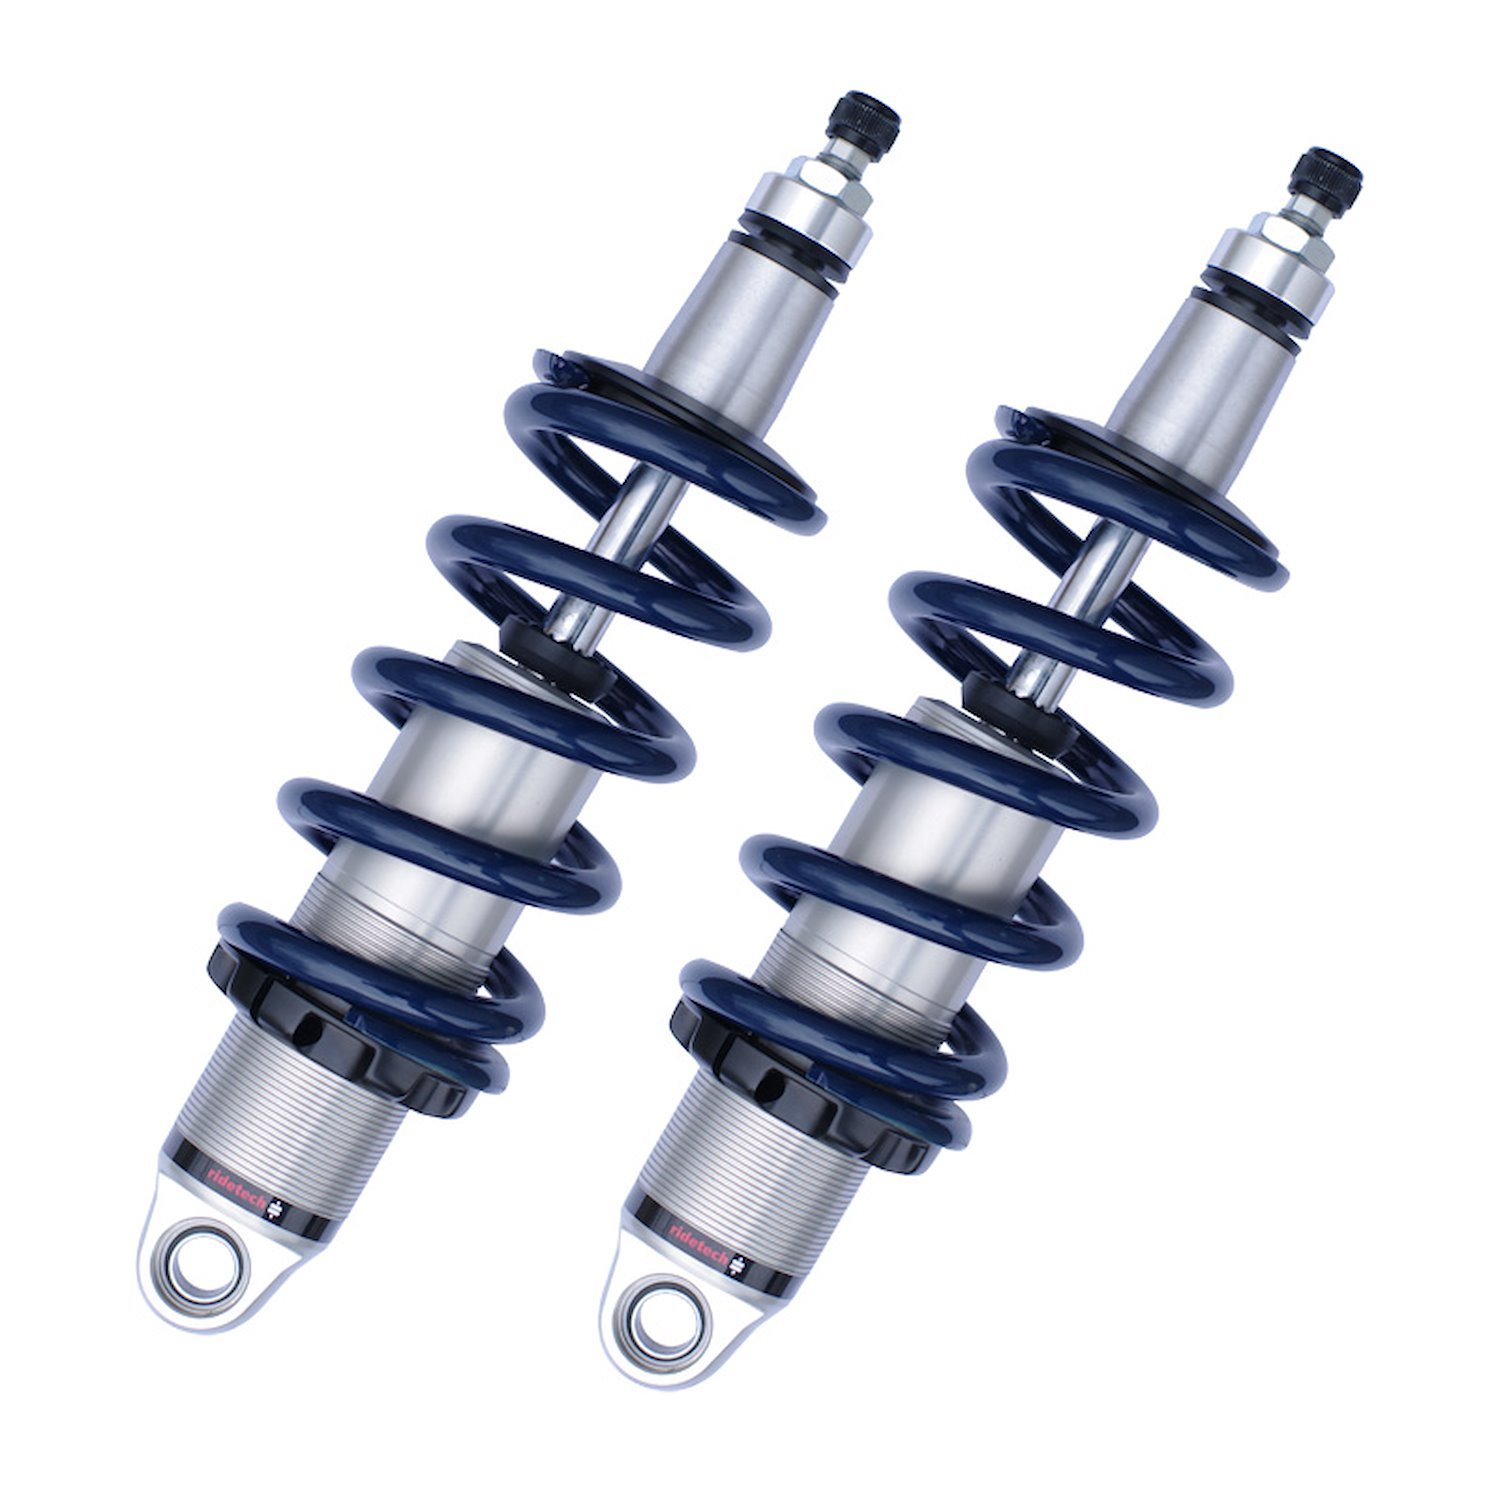 HQ Series front CoilOvers for 60-64 Galaxie includes